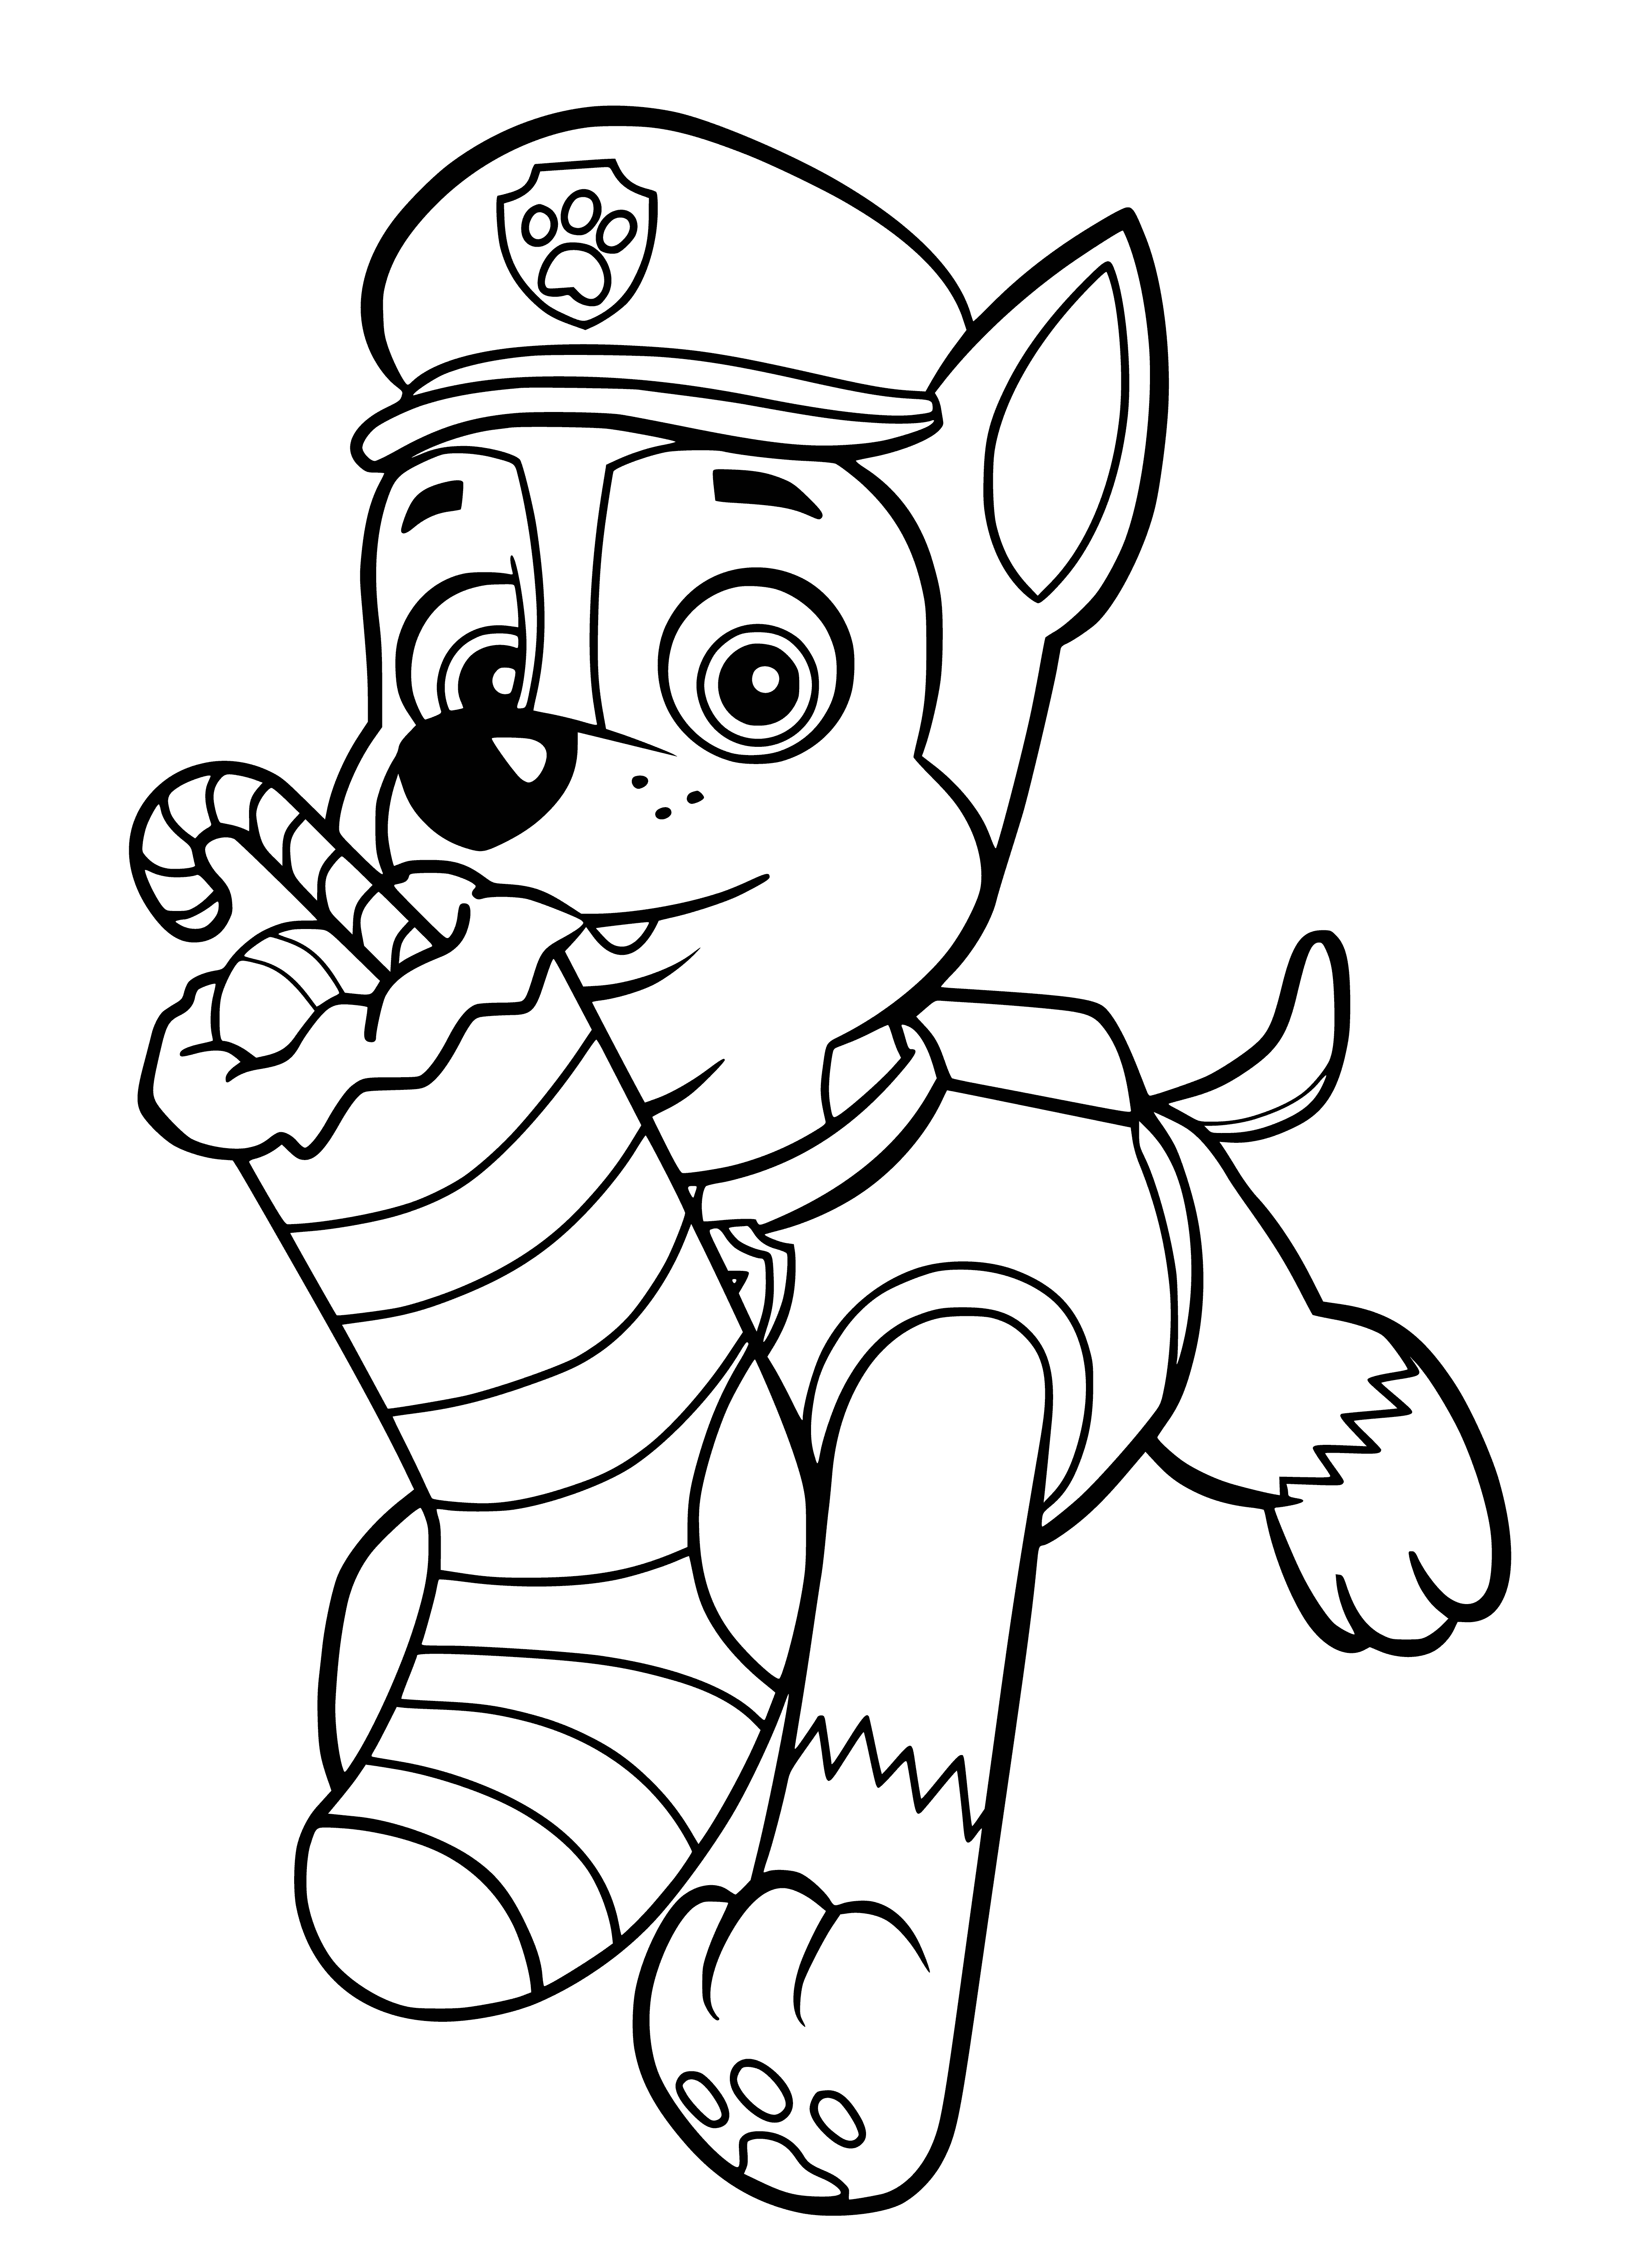 coloring page: Toy of Paw Patrol character Racer - plastic car: red, white, & blue; yellow roof; "PAW 1" license plate; spoiler; 4 blue wheels; white handle.